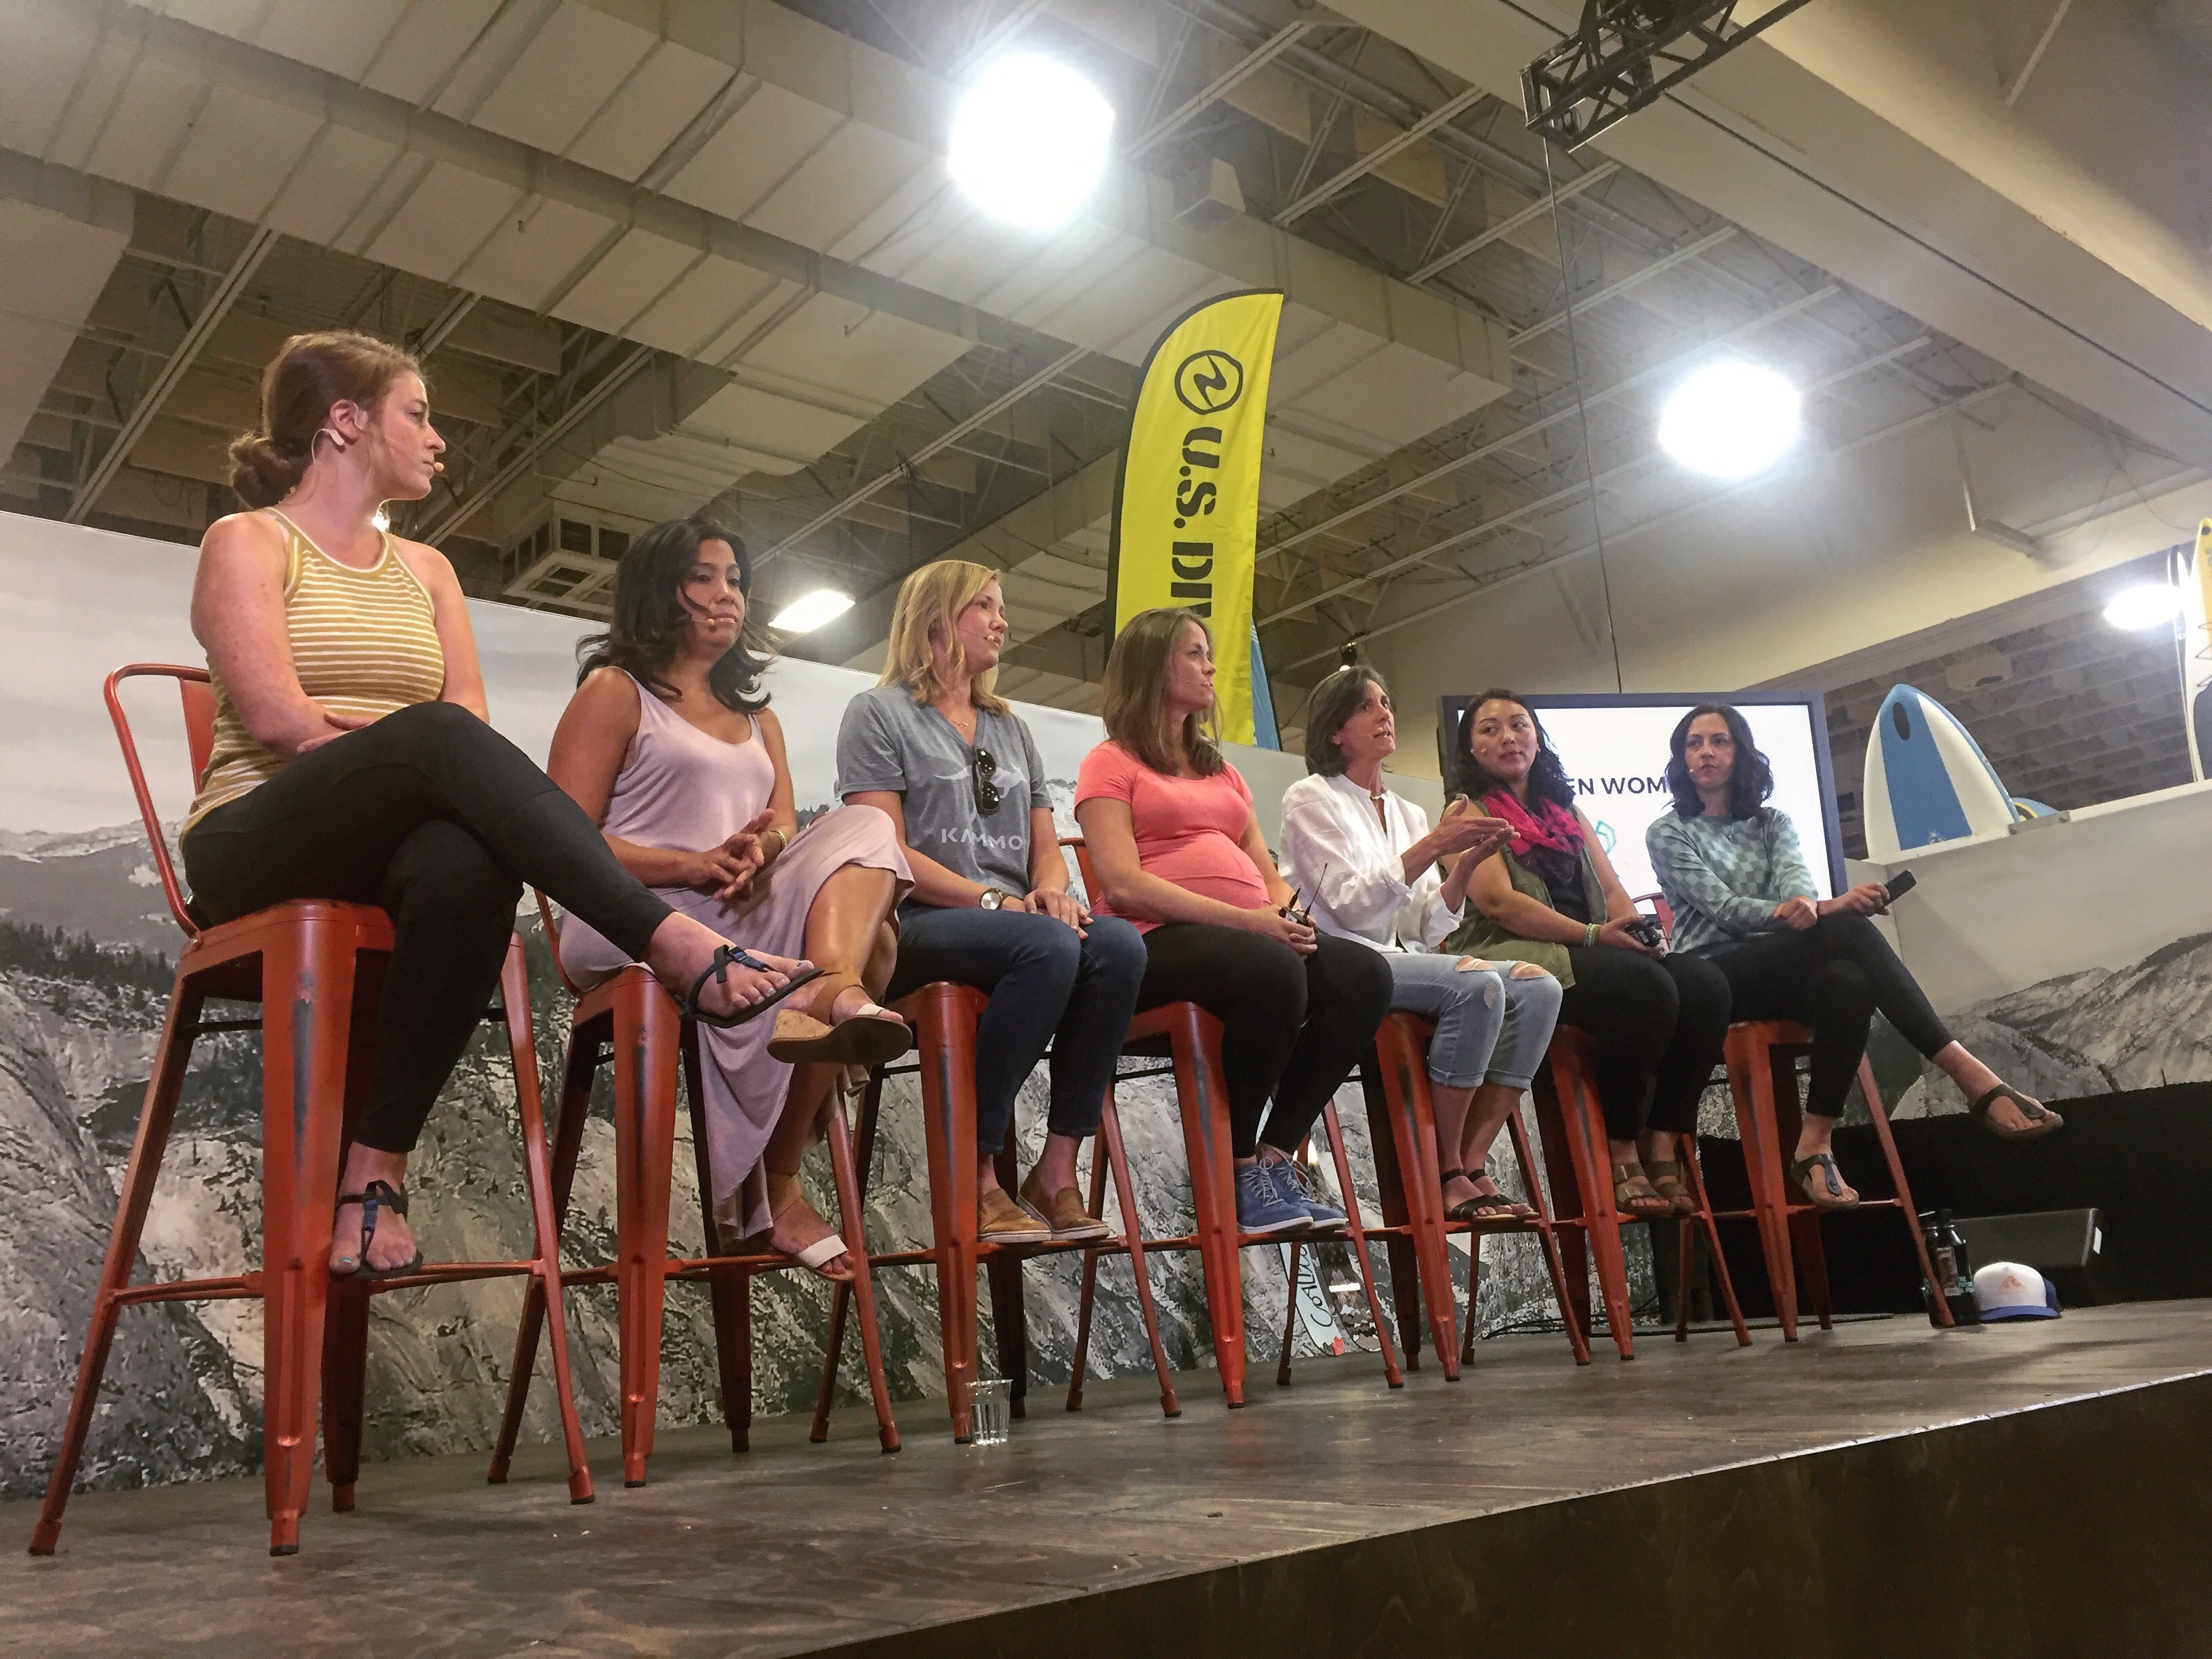 The When Women Lead panel, from left to right: Amanda Goad, founder of Wild Women's Project; Georgina Miranda, CEO of Altitude Seven; Haley Robison, CEO of Kammok; Heather Rochfort, founder of JustAColoradoGal.com; Jennifer Vierling, co-founder of Tailwind Nutrition; Tsedo Sherpa-Ednalino, COO of Sherpa Adventure Gear; and Jen Gurecki, co-founder and CEO of Coalition Snow. [Photo] Emma Murray